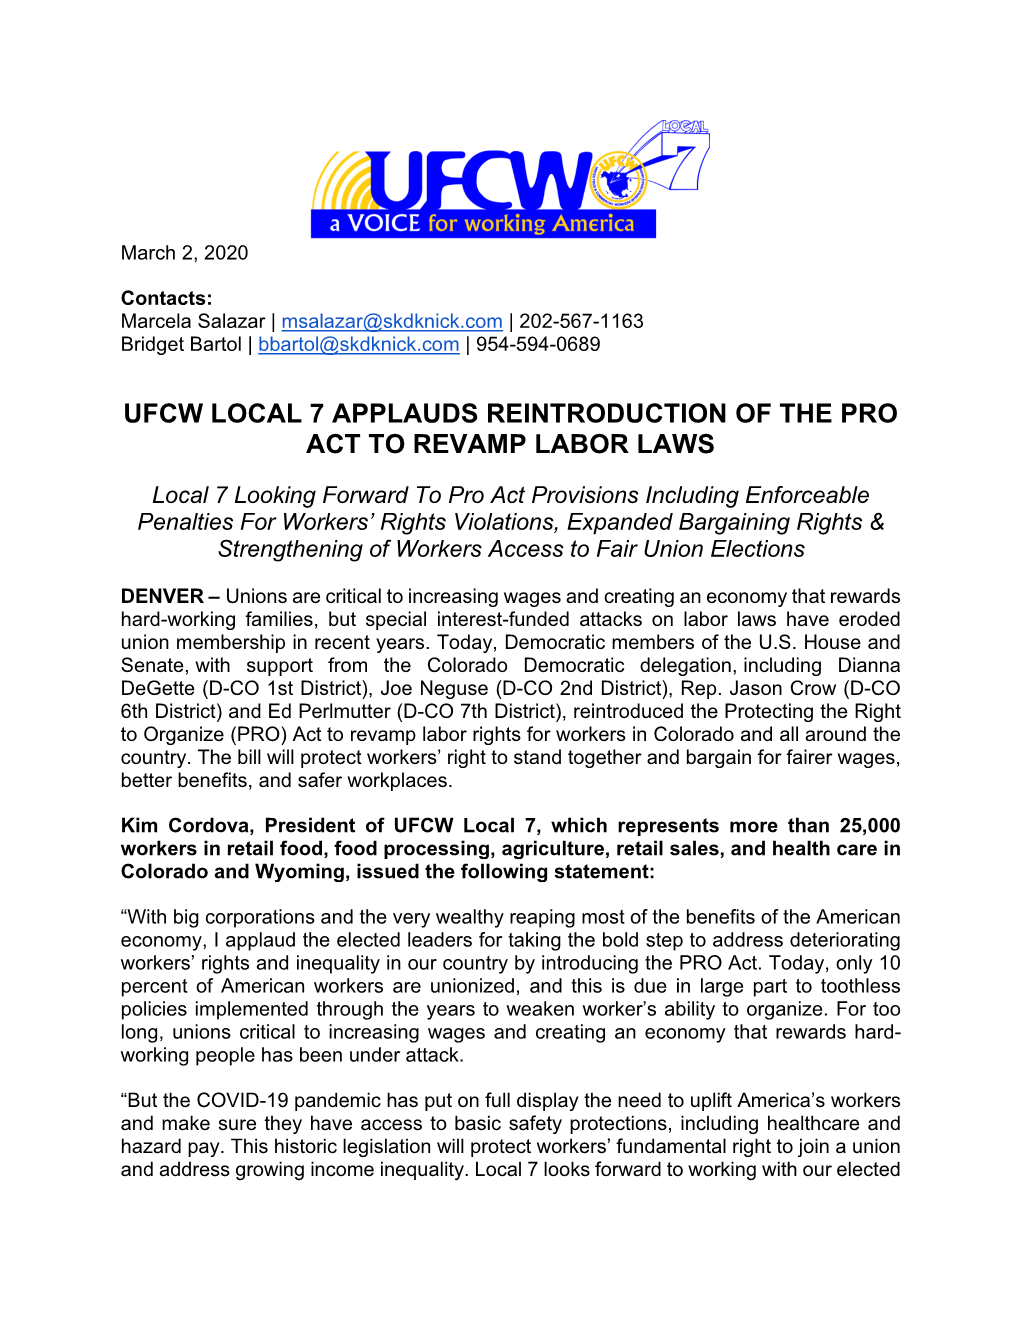 For Immediate Release – UFCW LOCAL 7 APPLAUDS